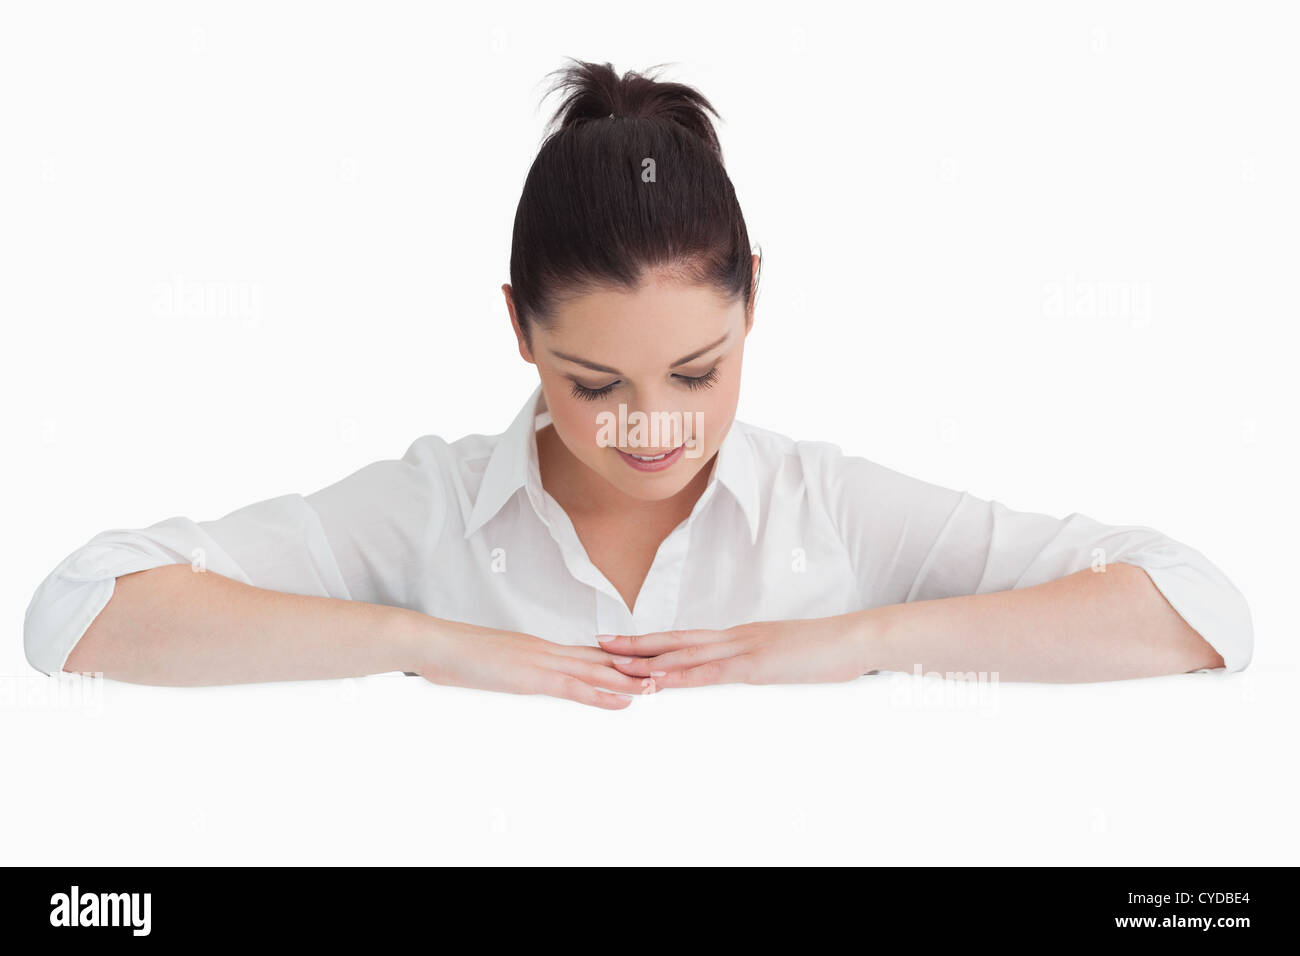 Woman leaning on arms and looking down Stock Photo